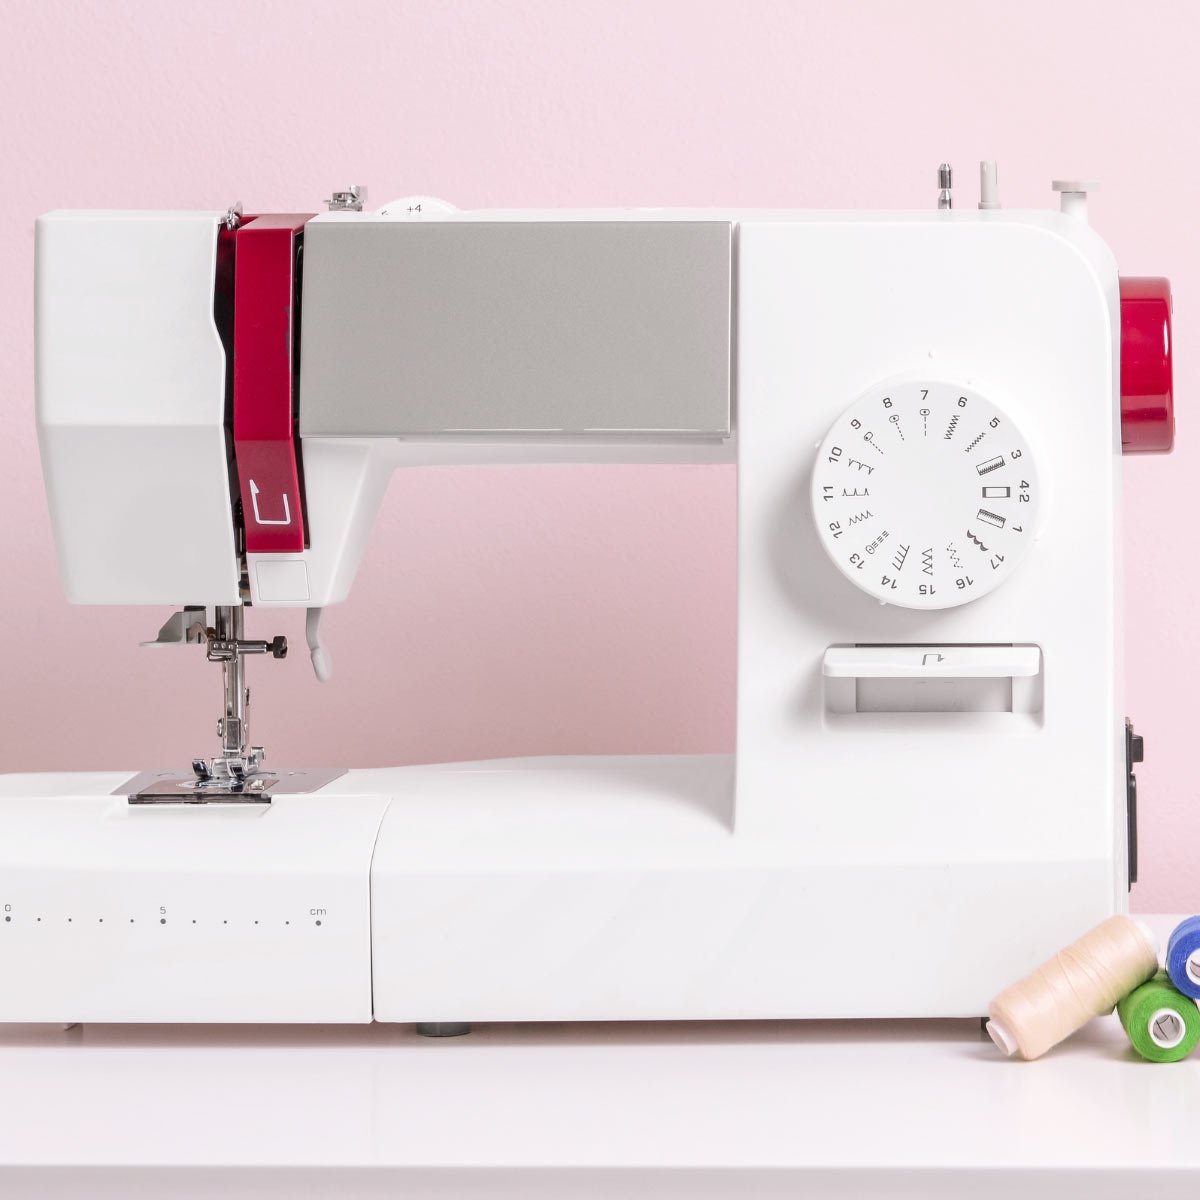 Transform Fabric into Trim with Industrial Sewing Machine Hemming Tool